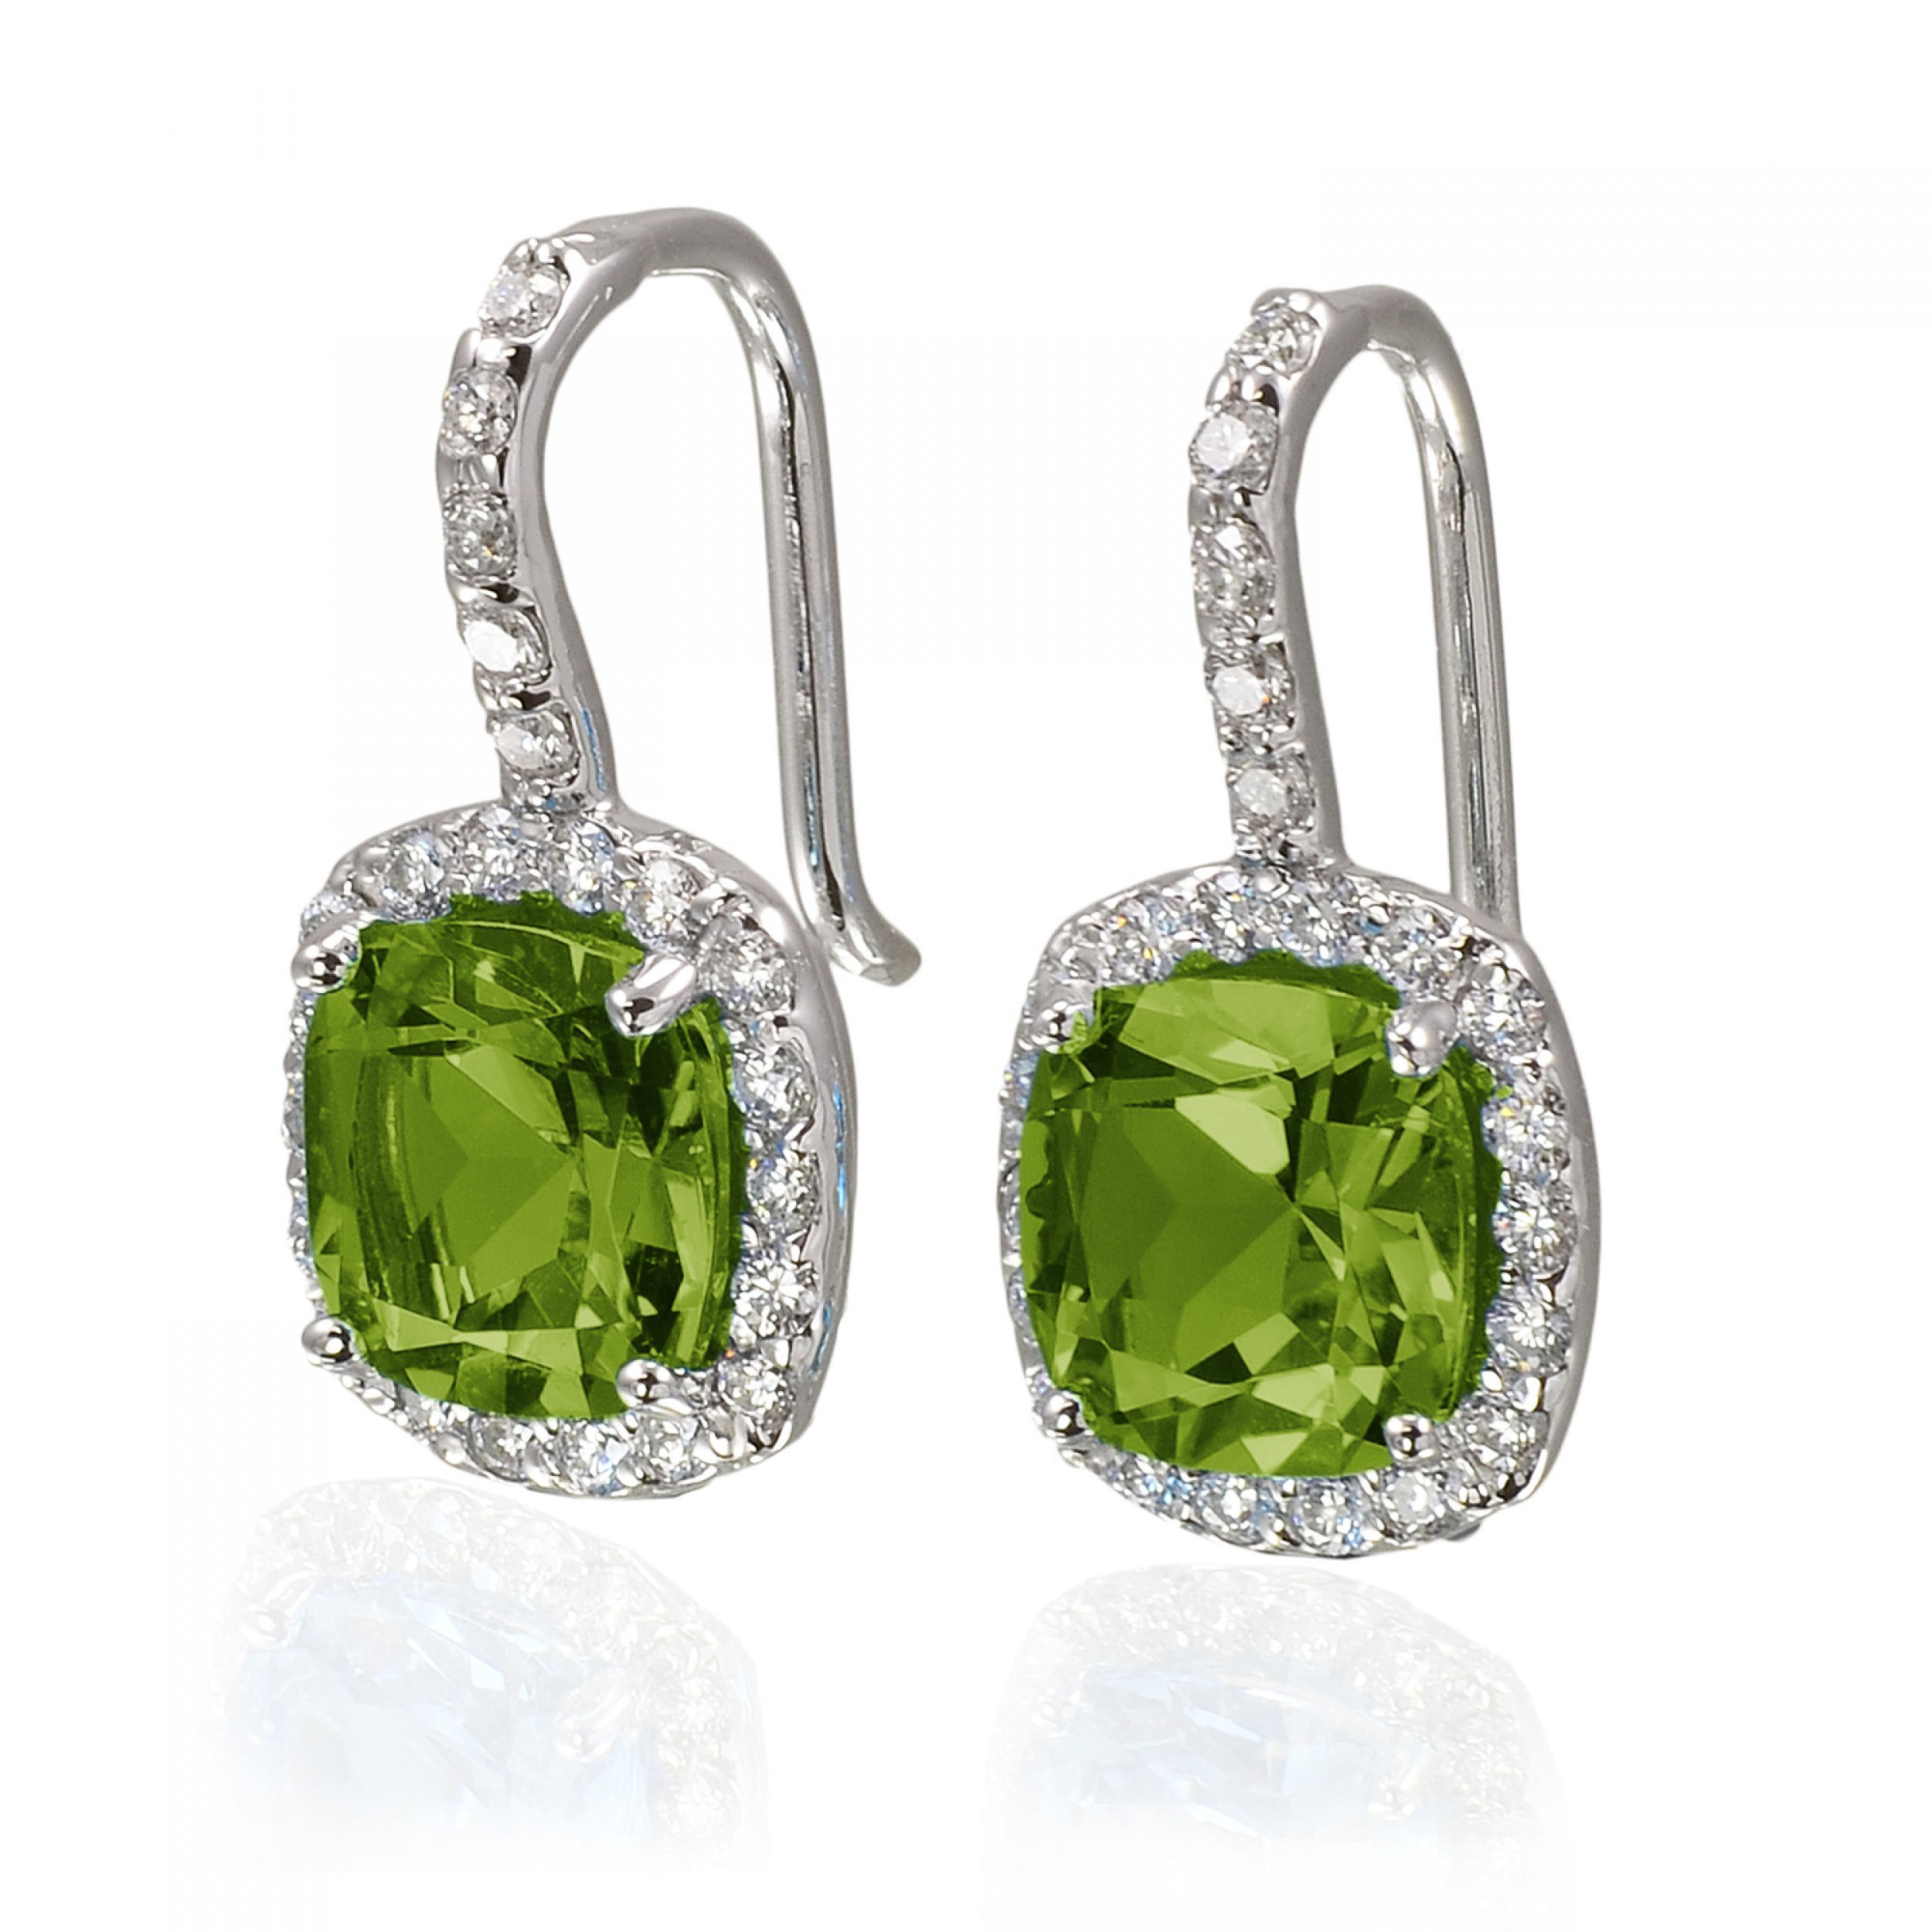 Great looks are possible with peridot earrings